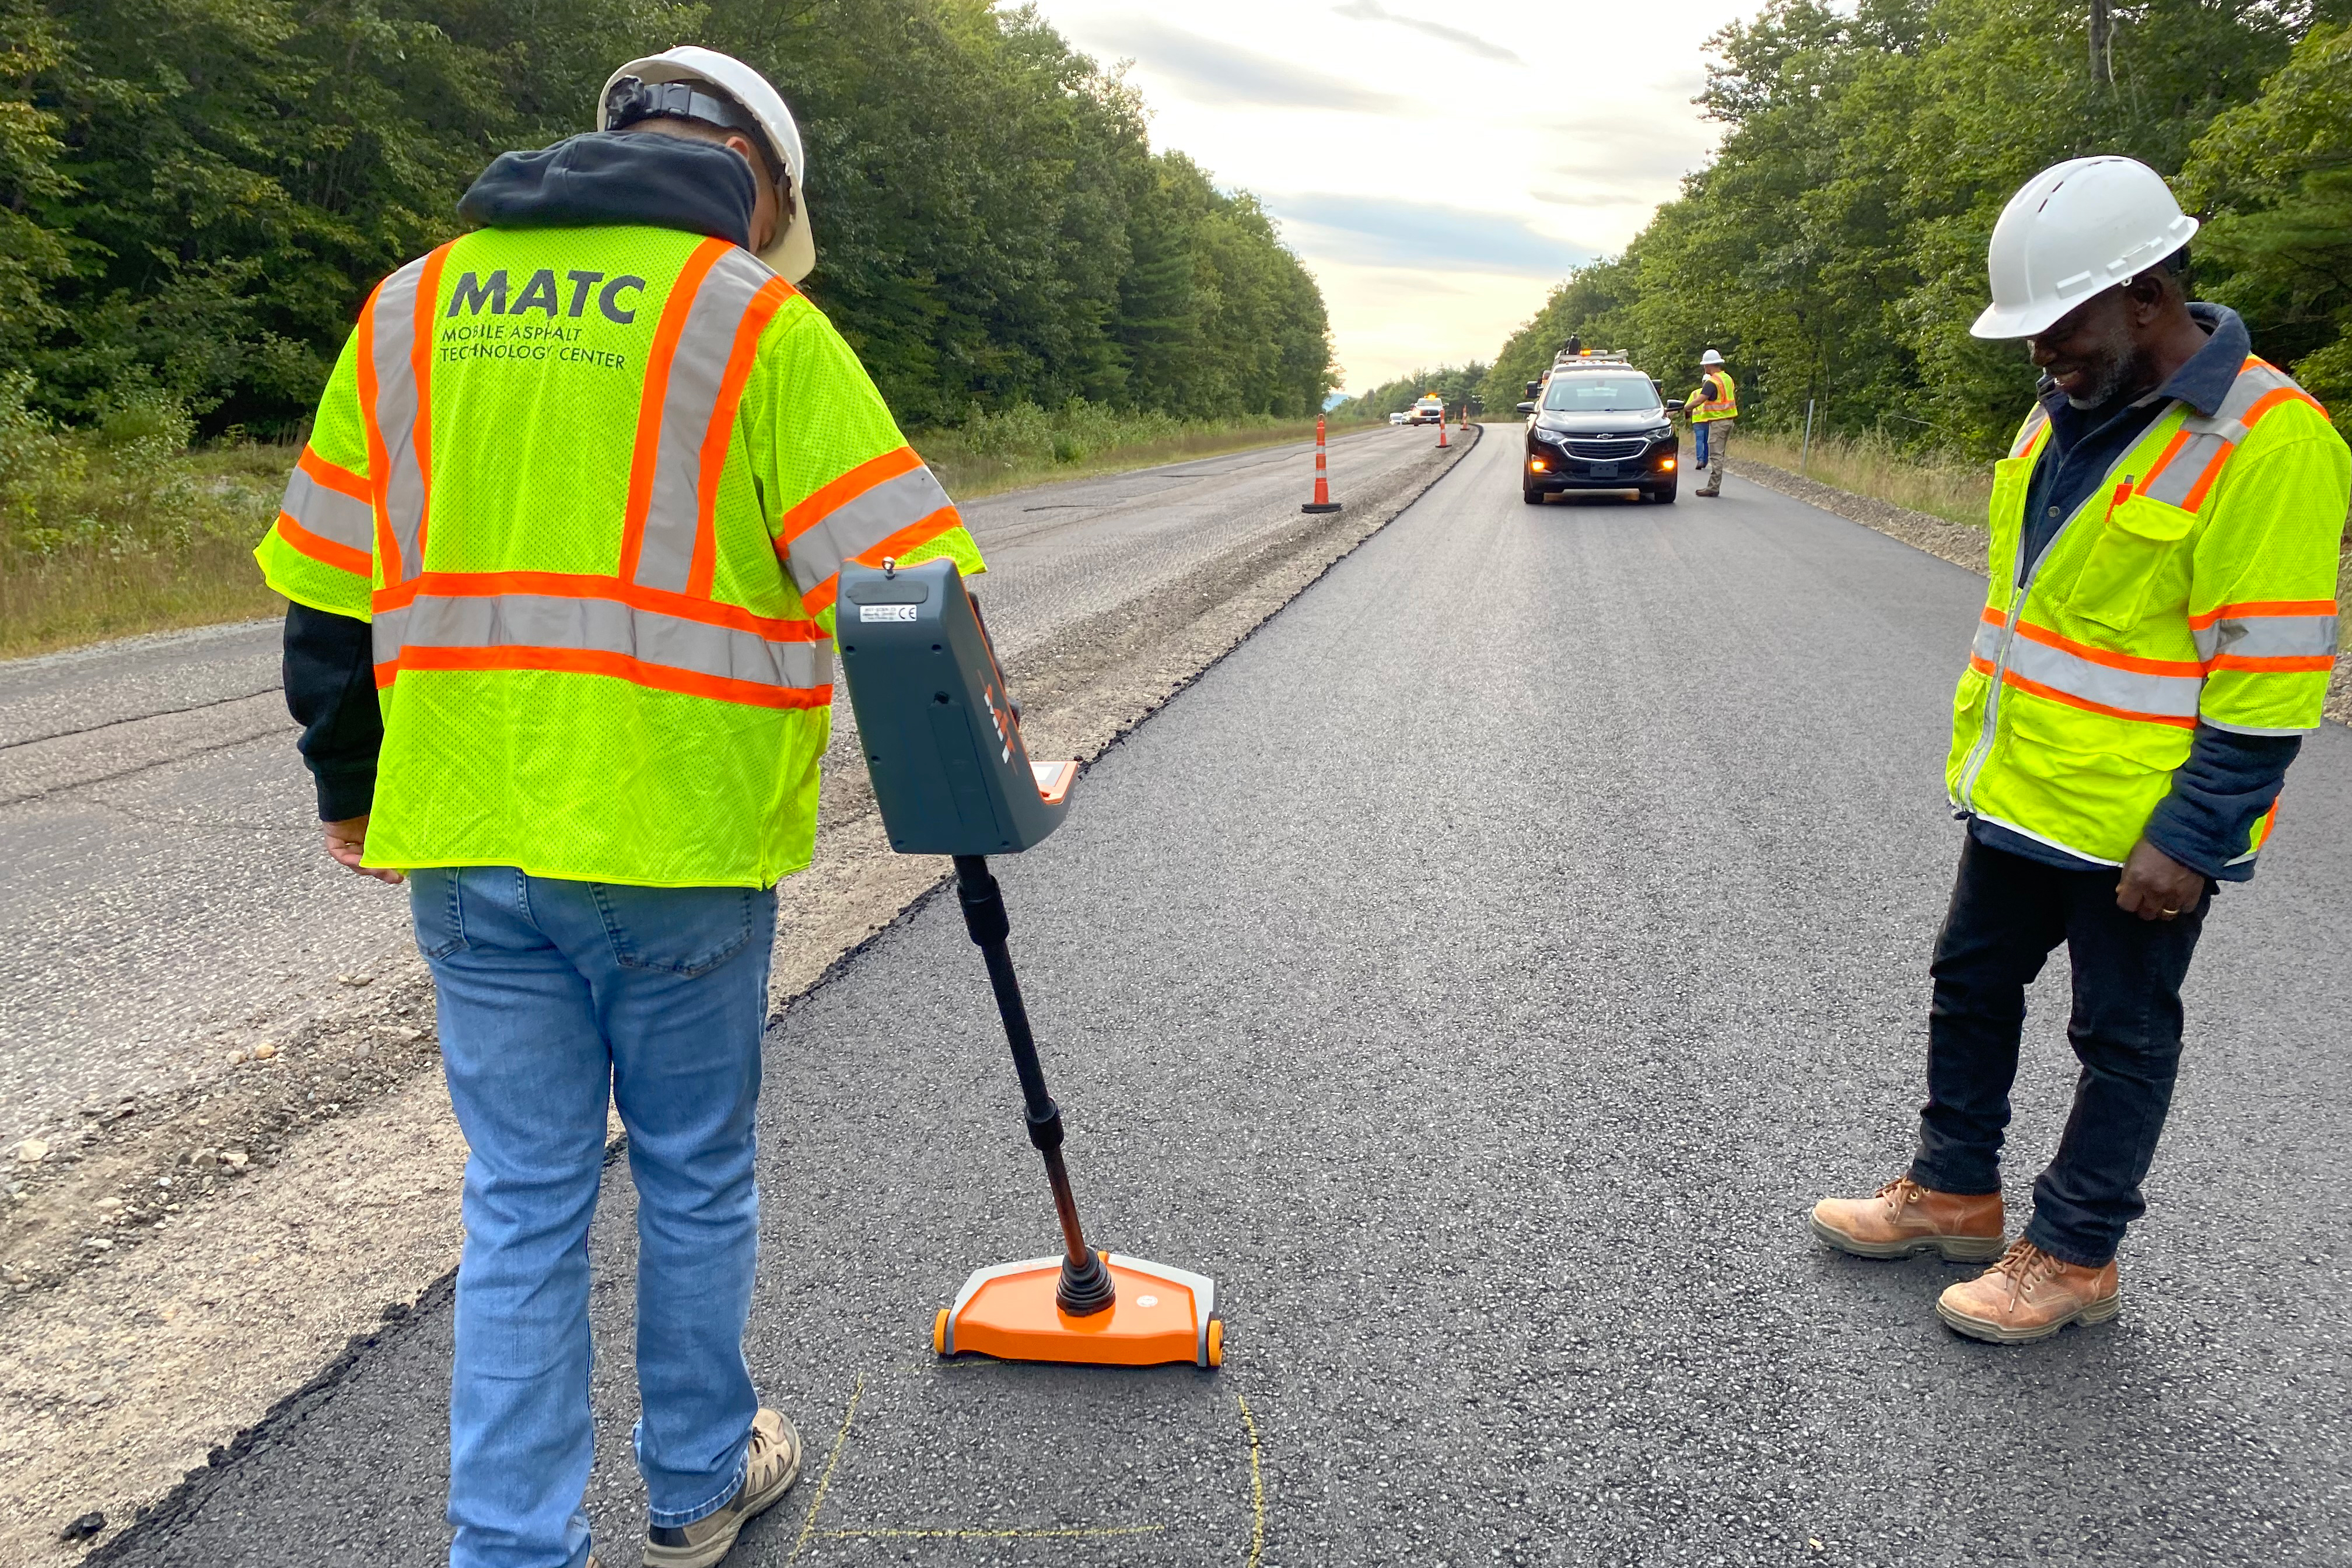 Two men in construction vests on an active asphalt paving process who are running a pulse induction test